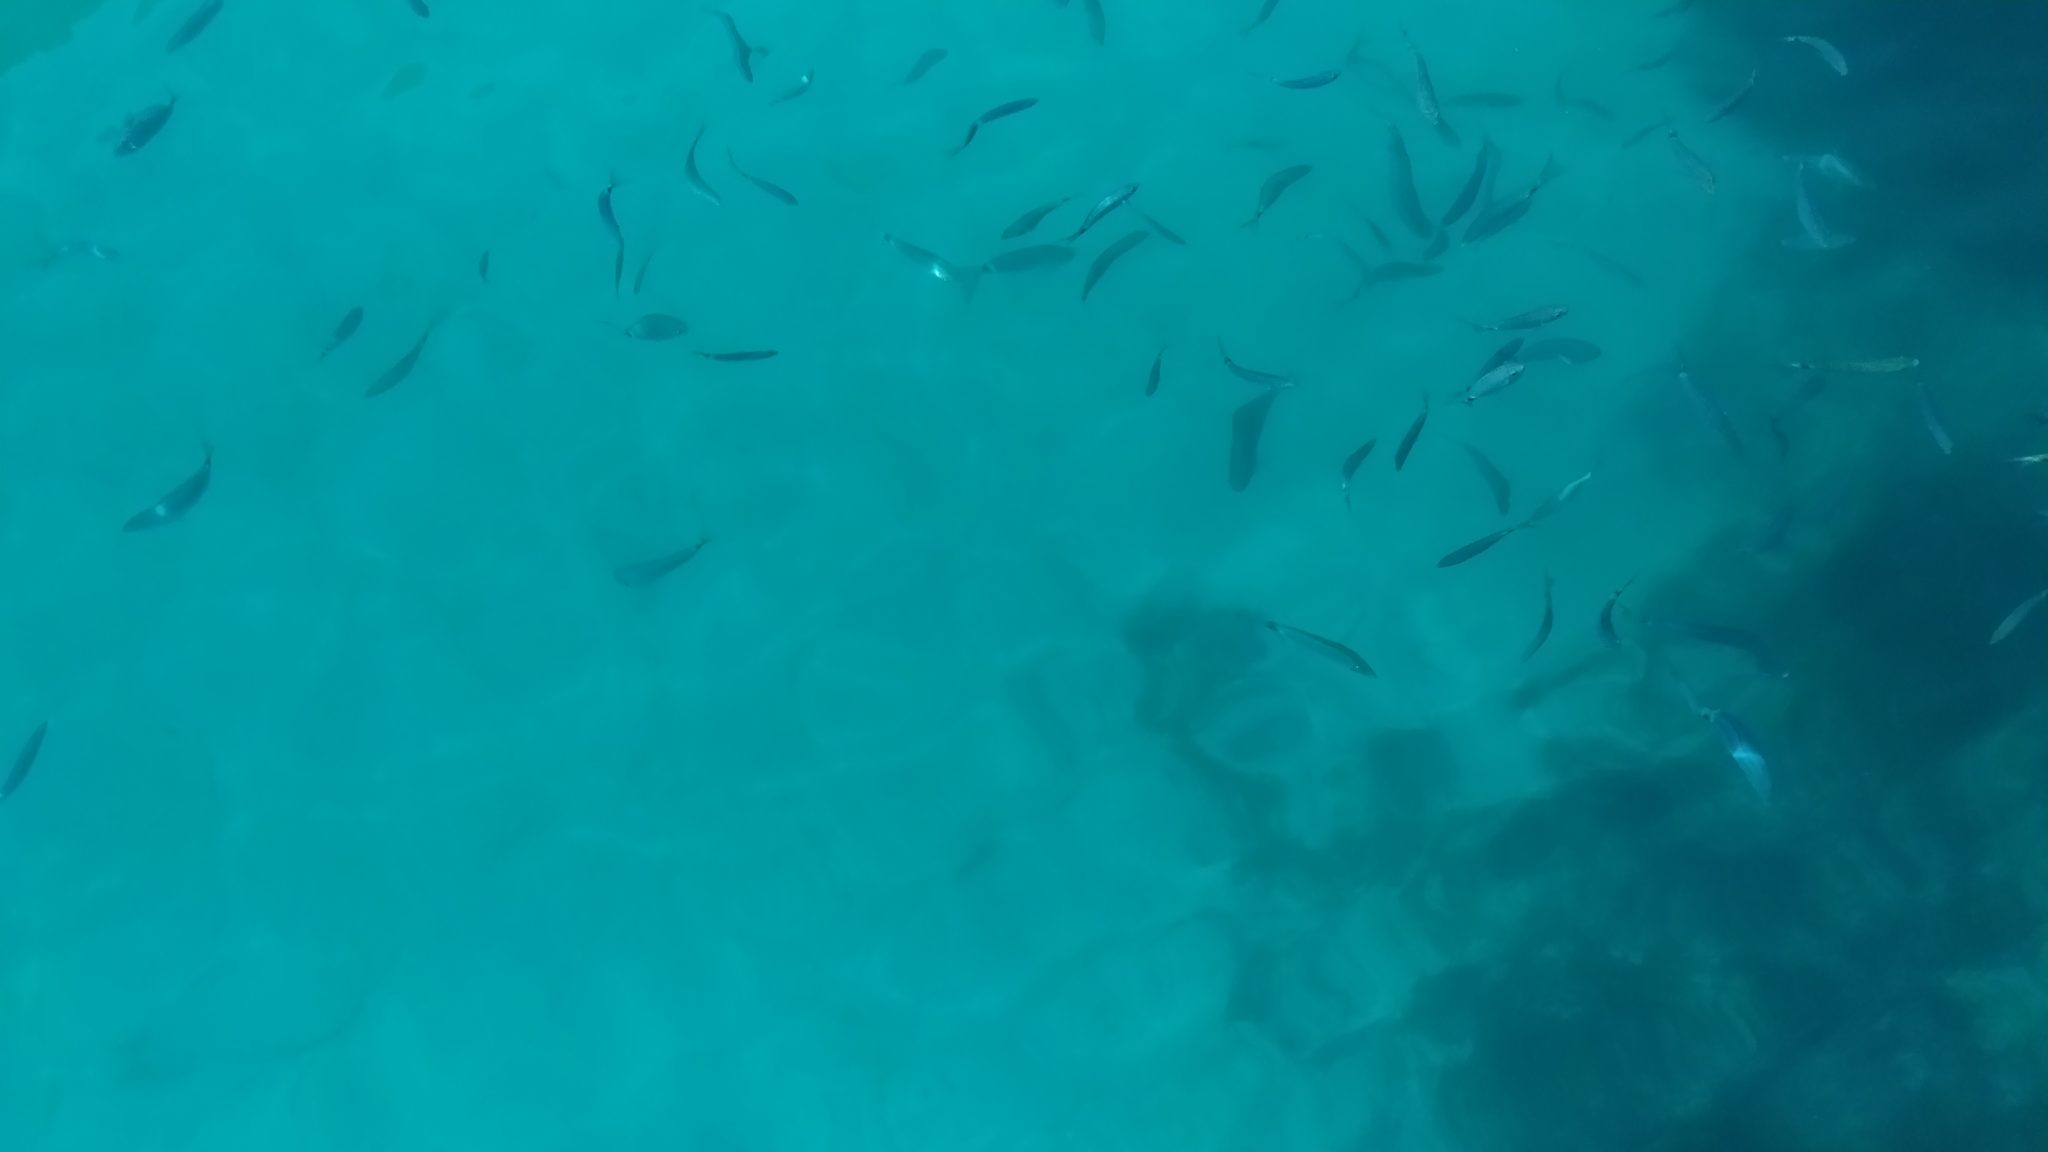 Fishes in a turquoise sea